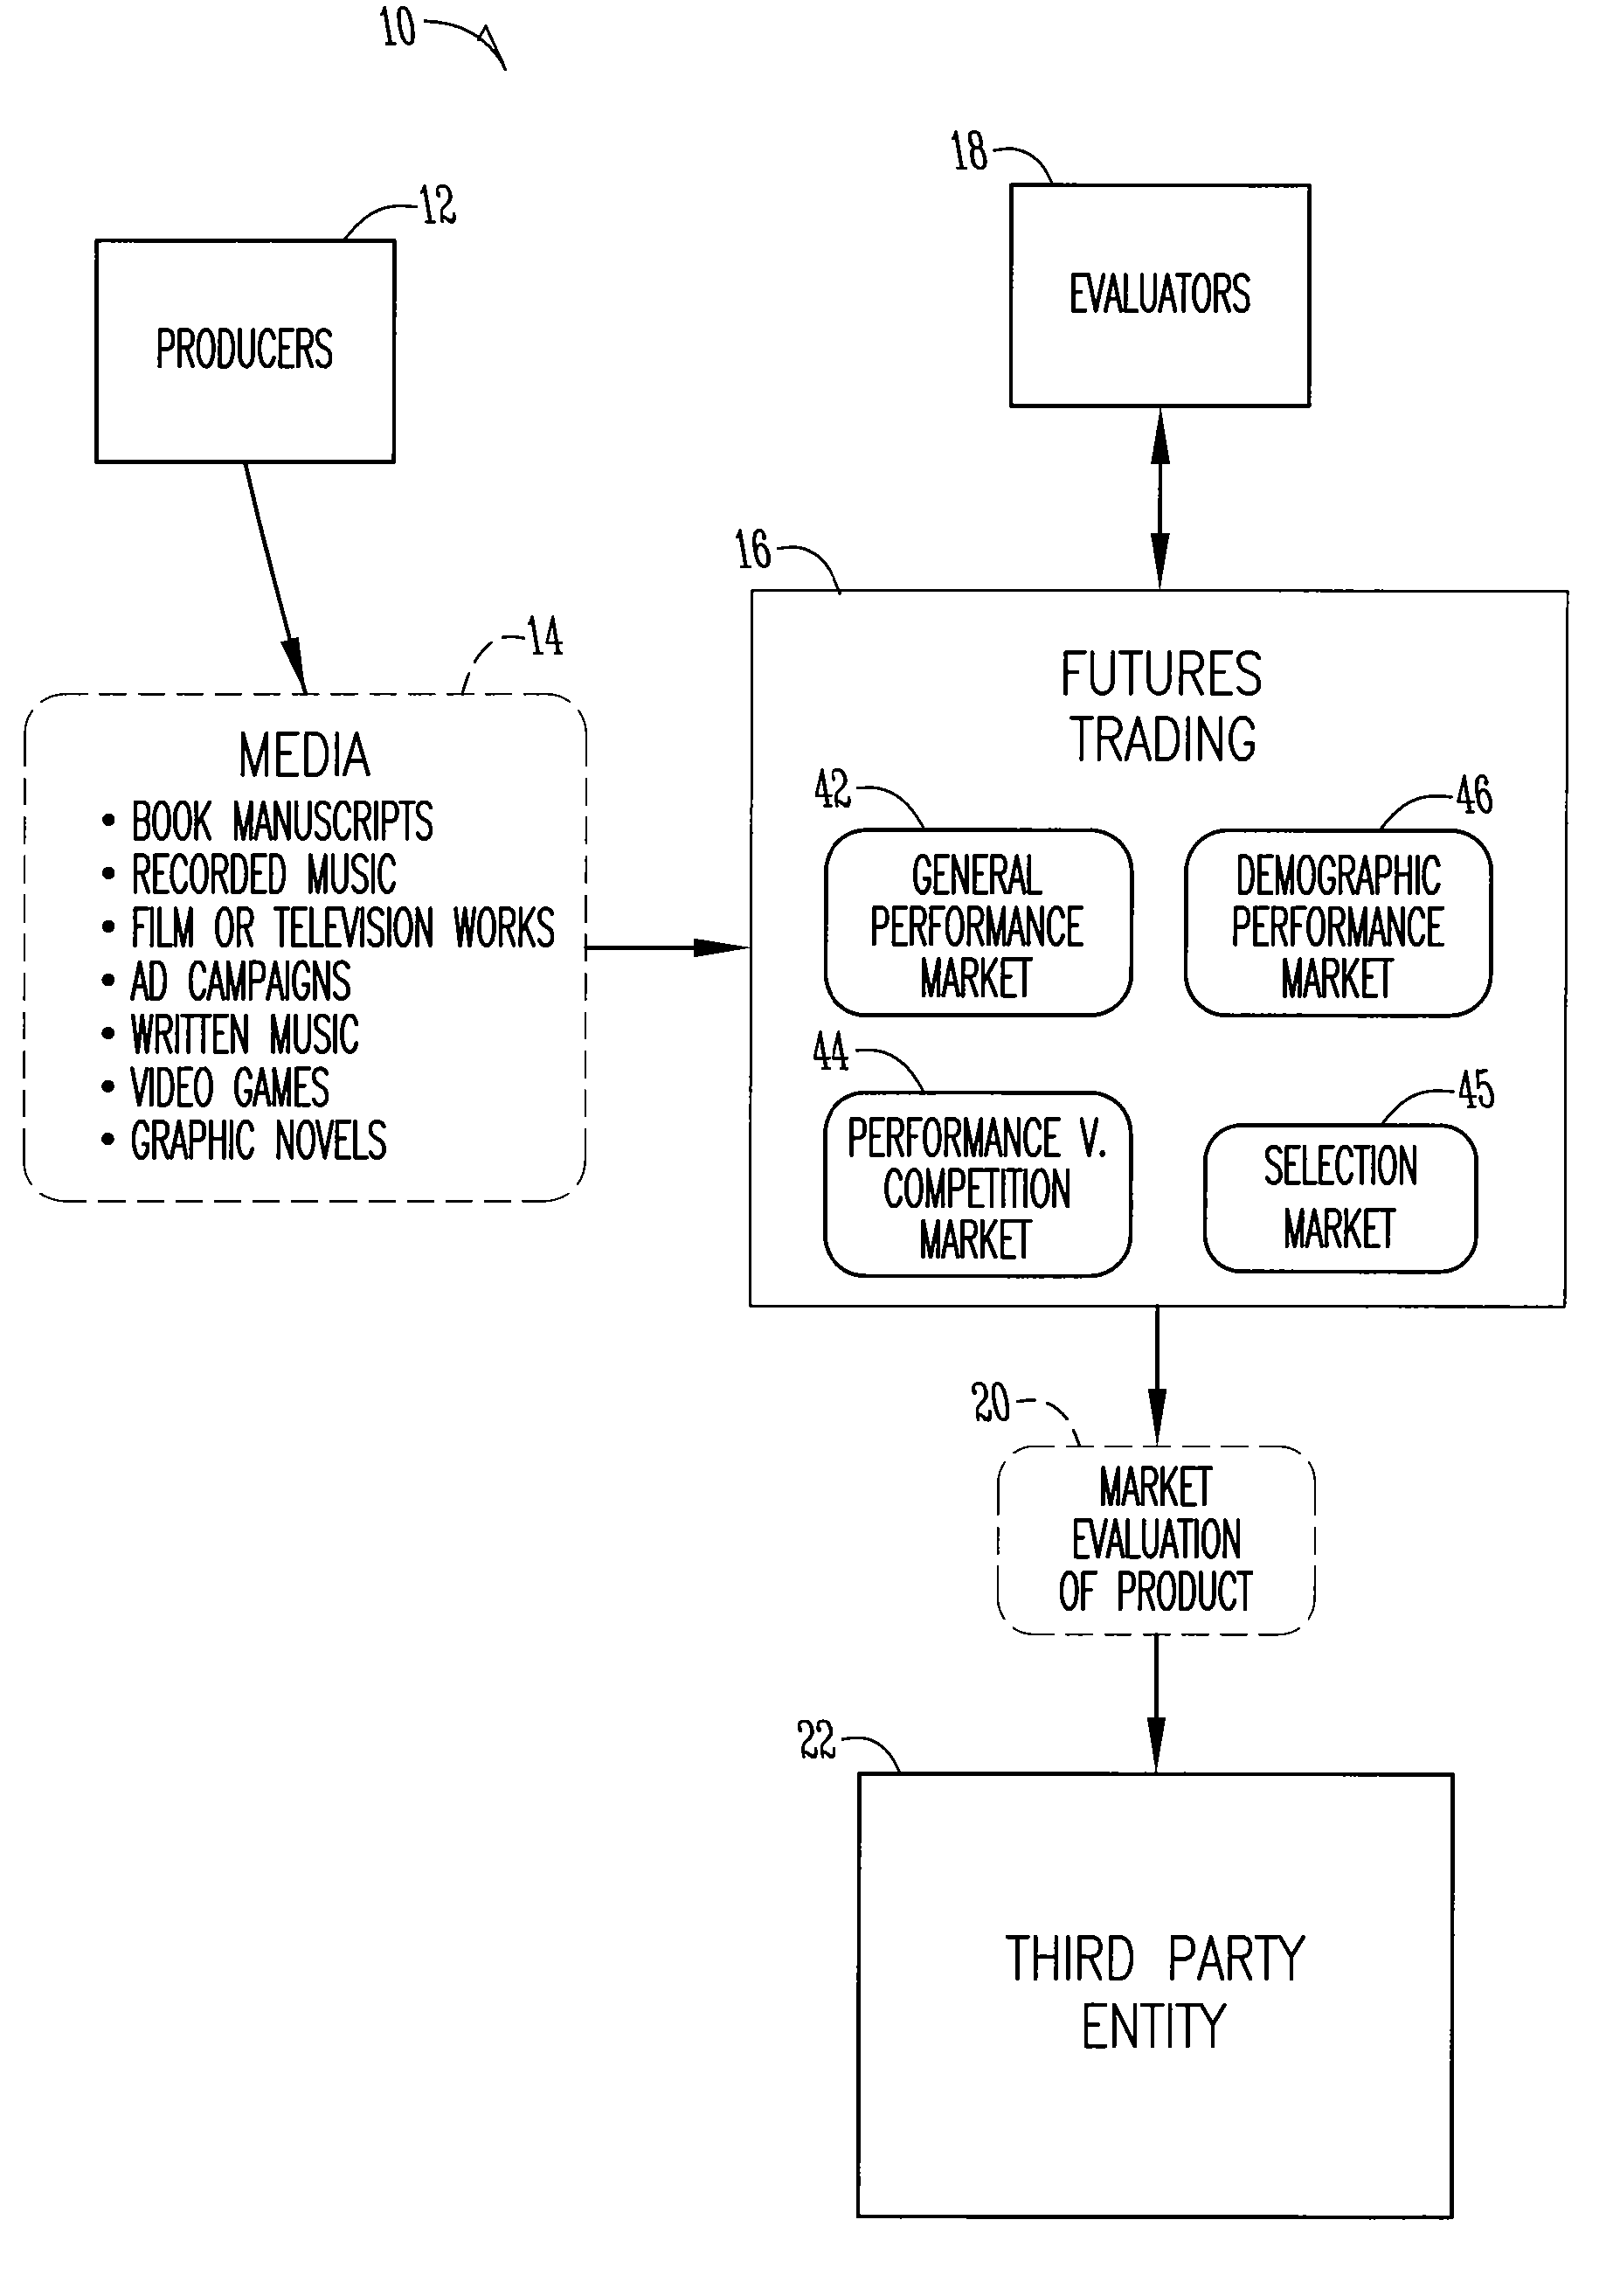 Method for evaluating media products for purposes of third-party association